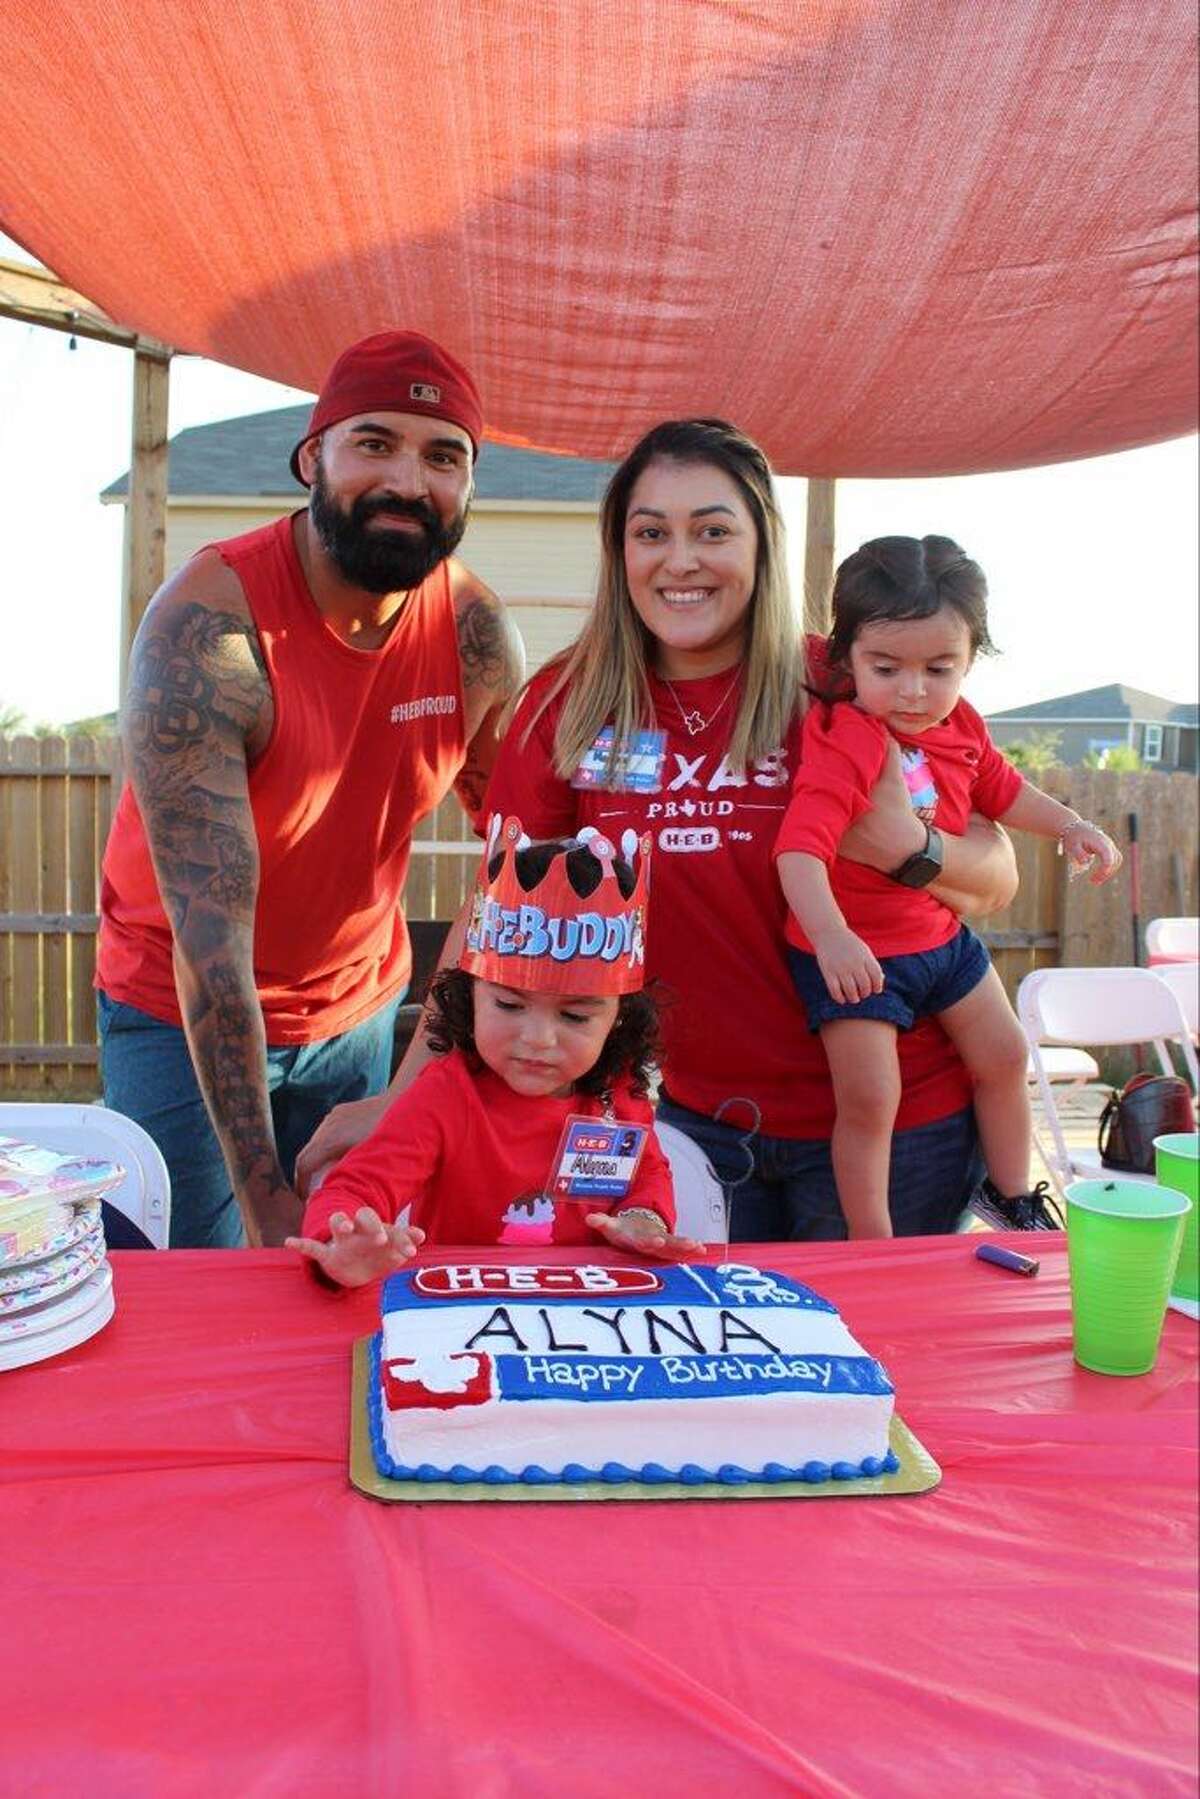 Jessica Belasquez shared the details of her daughter Alyna's third birthday party which was celebrated in full H-E-B theme. Even the H-E-Buddy was on hand.